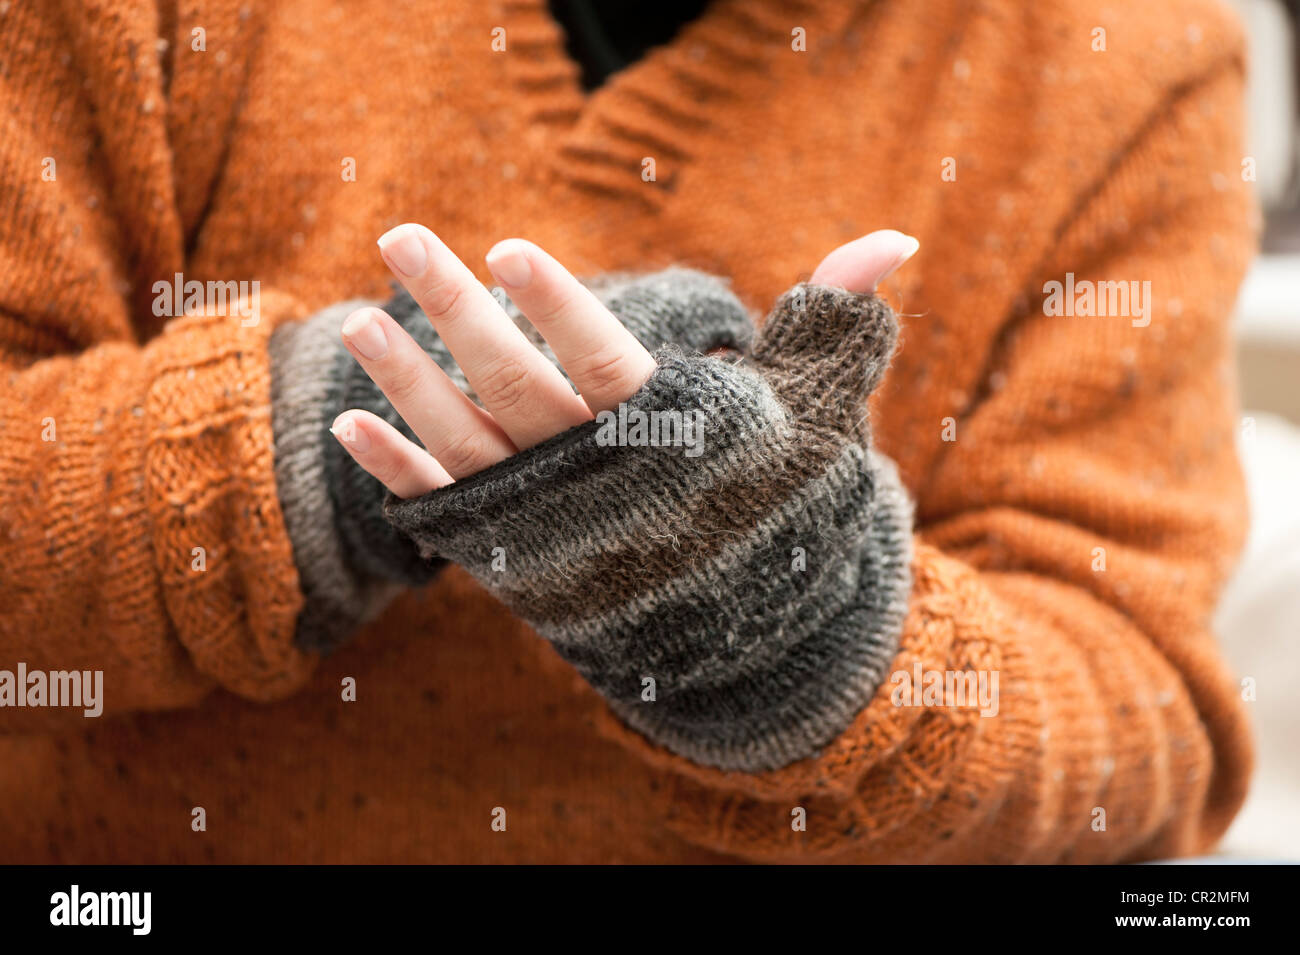 Hands Wearing Knitted Woolen Fingerless Gloves Stock Photo, Picture And  Royalty Free Image